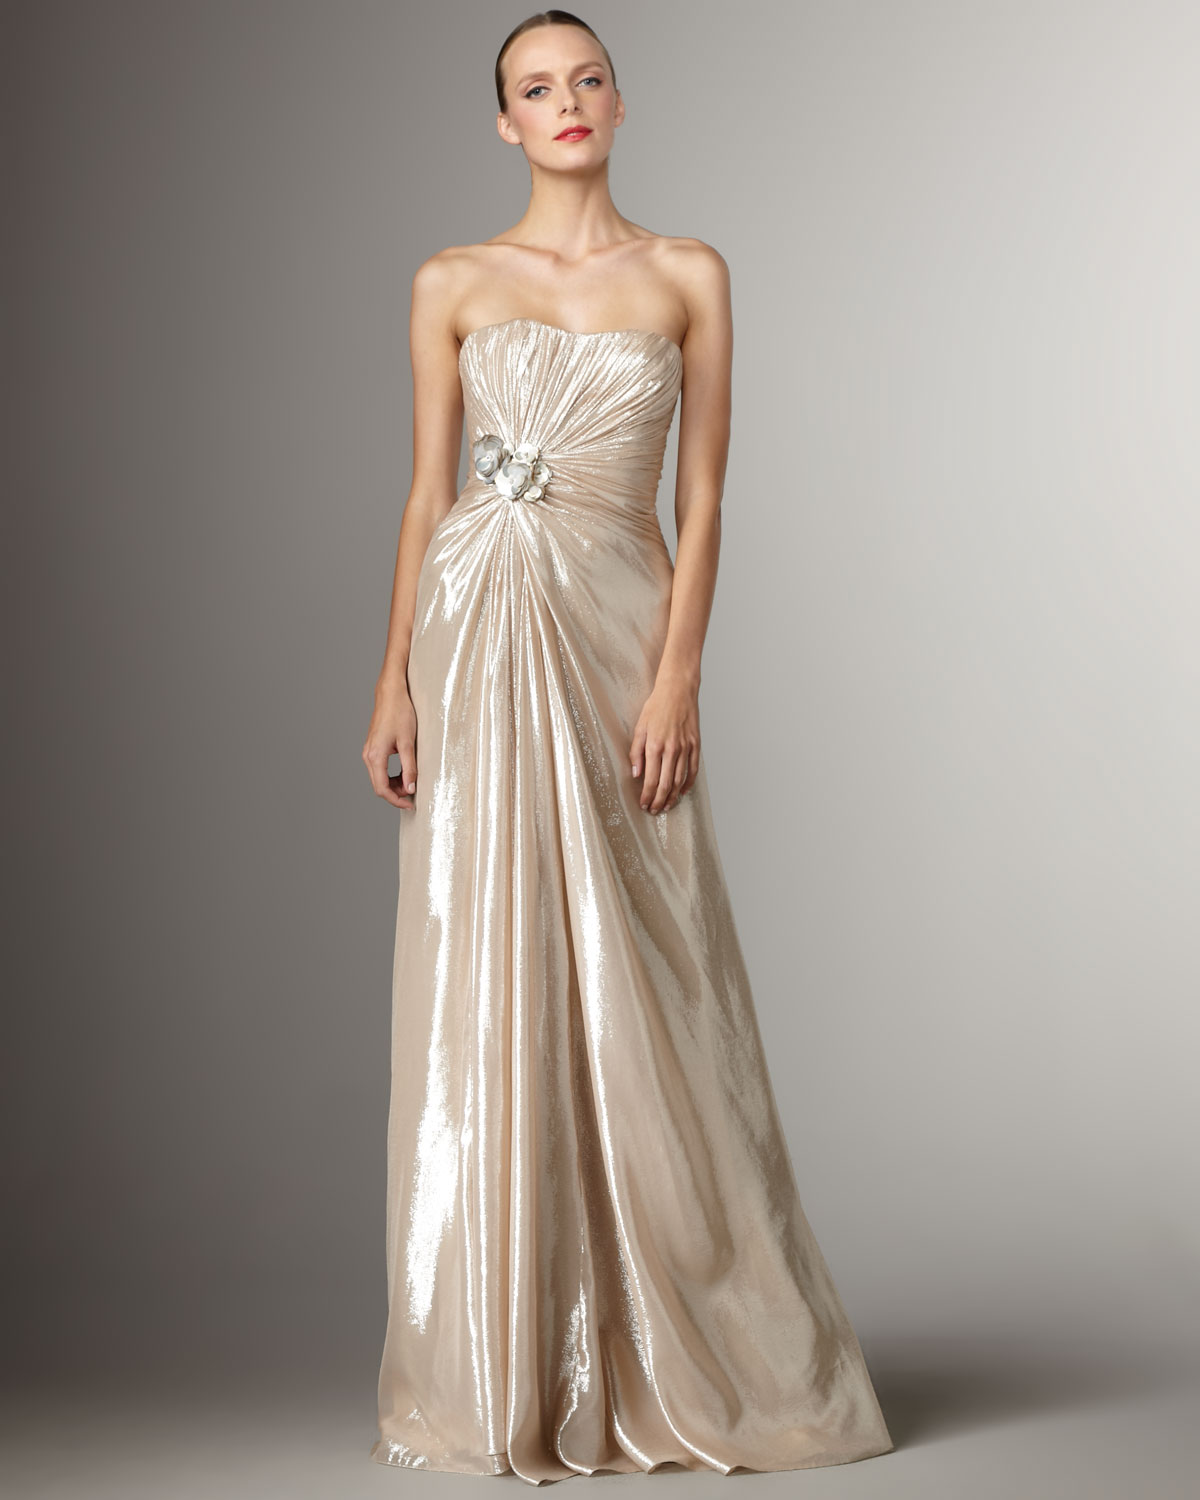 silver lame gown